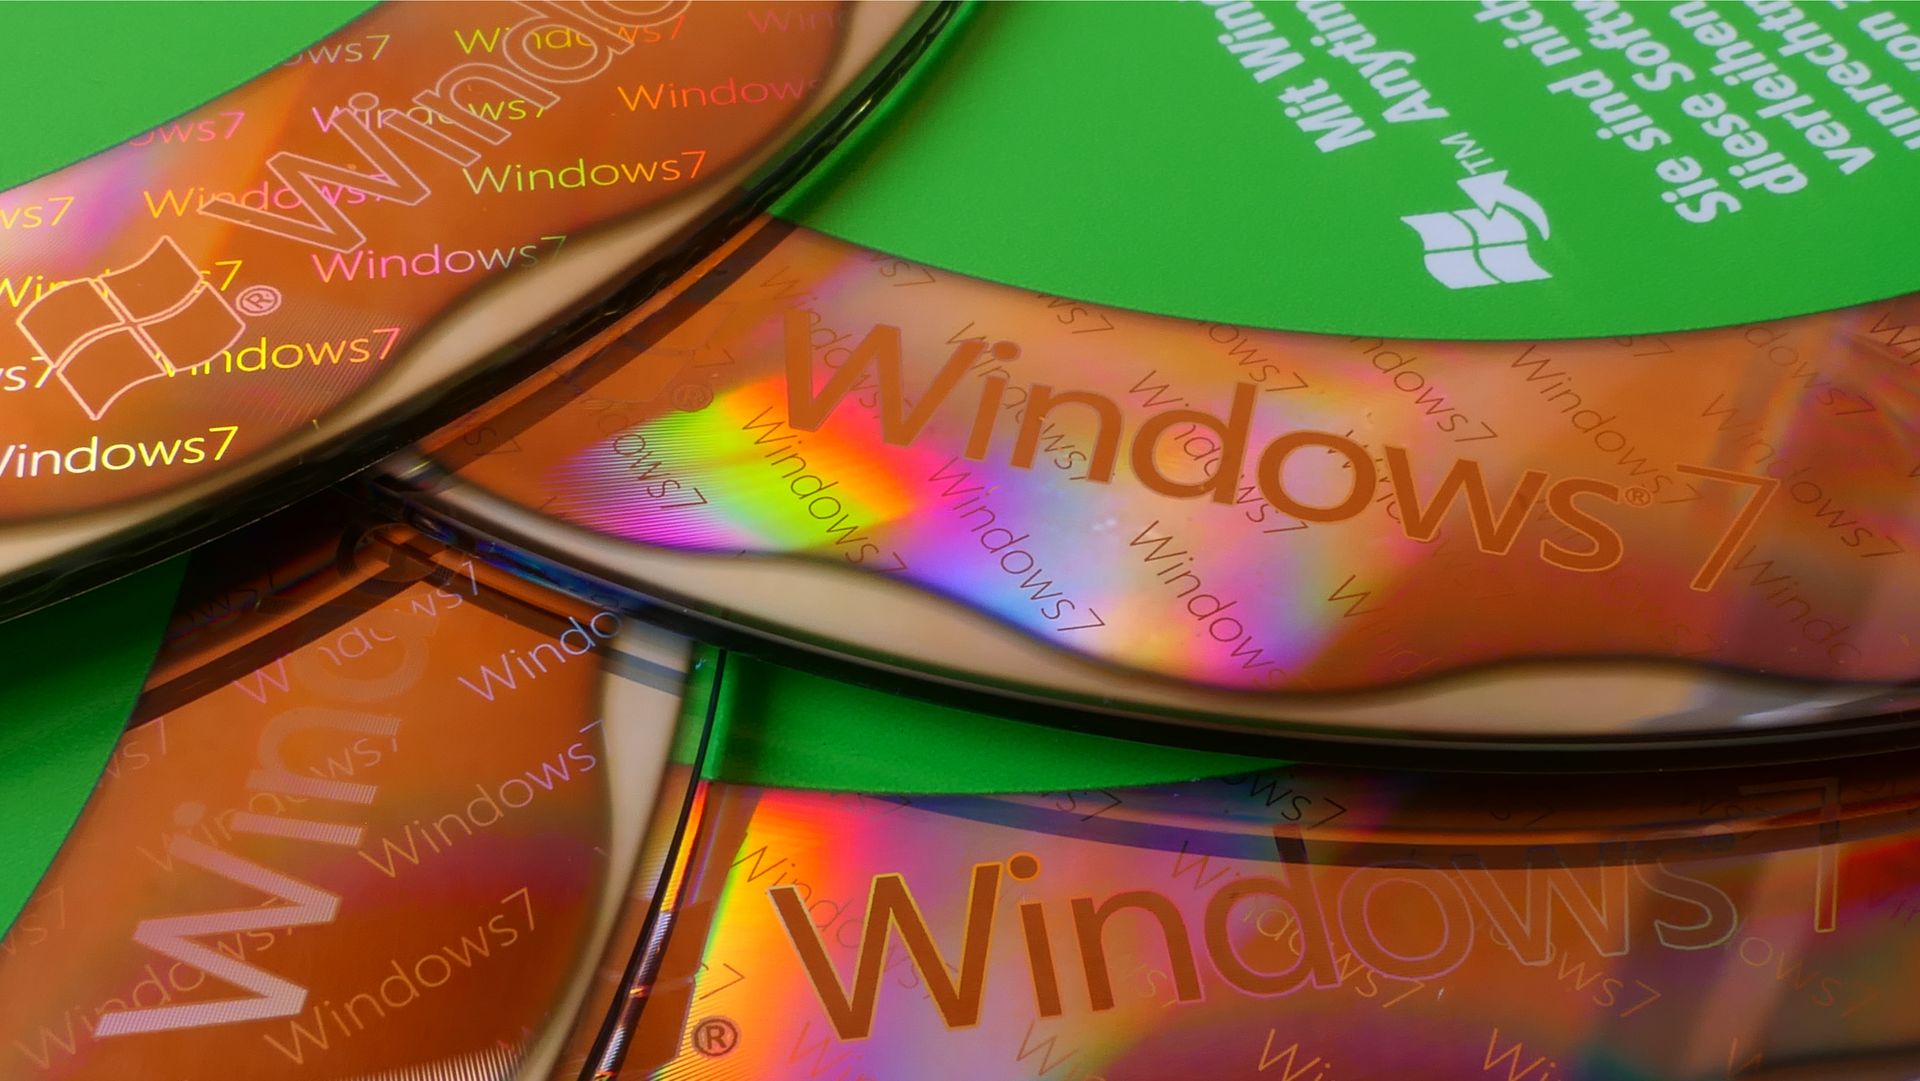 Windows 7 is dead, but you can still upgrade to Windows 10 for free